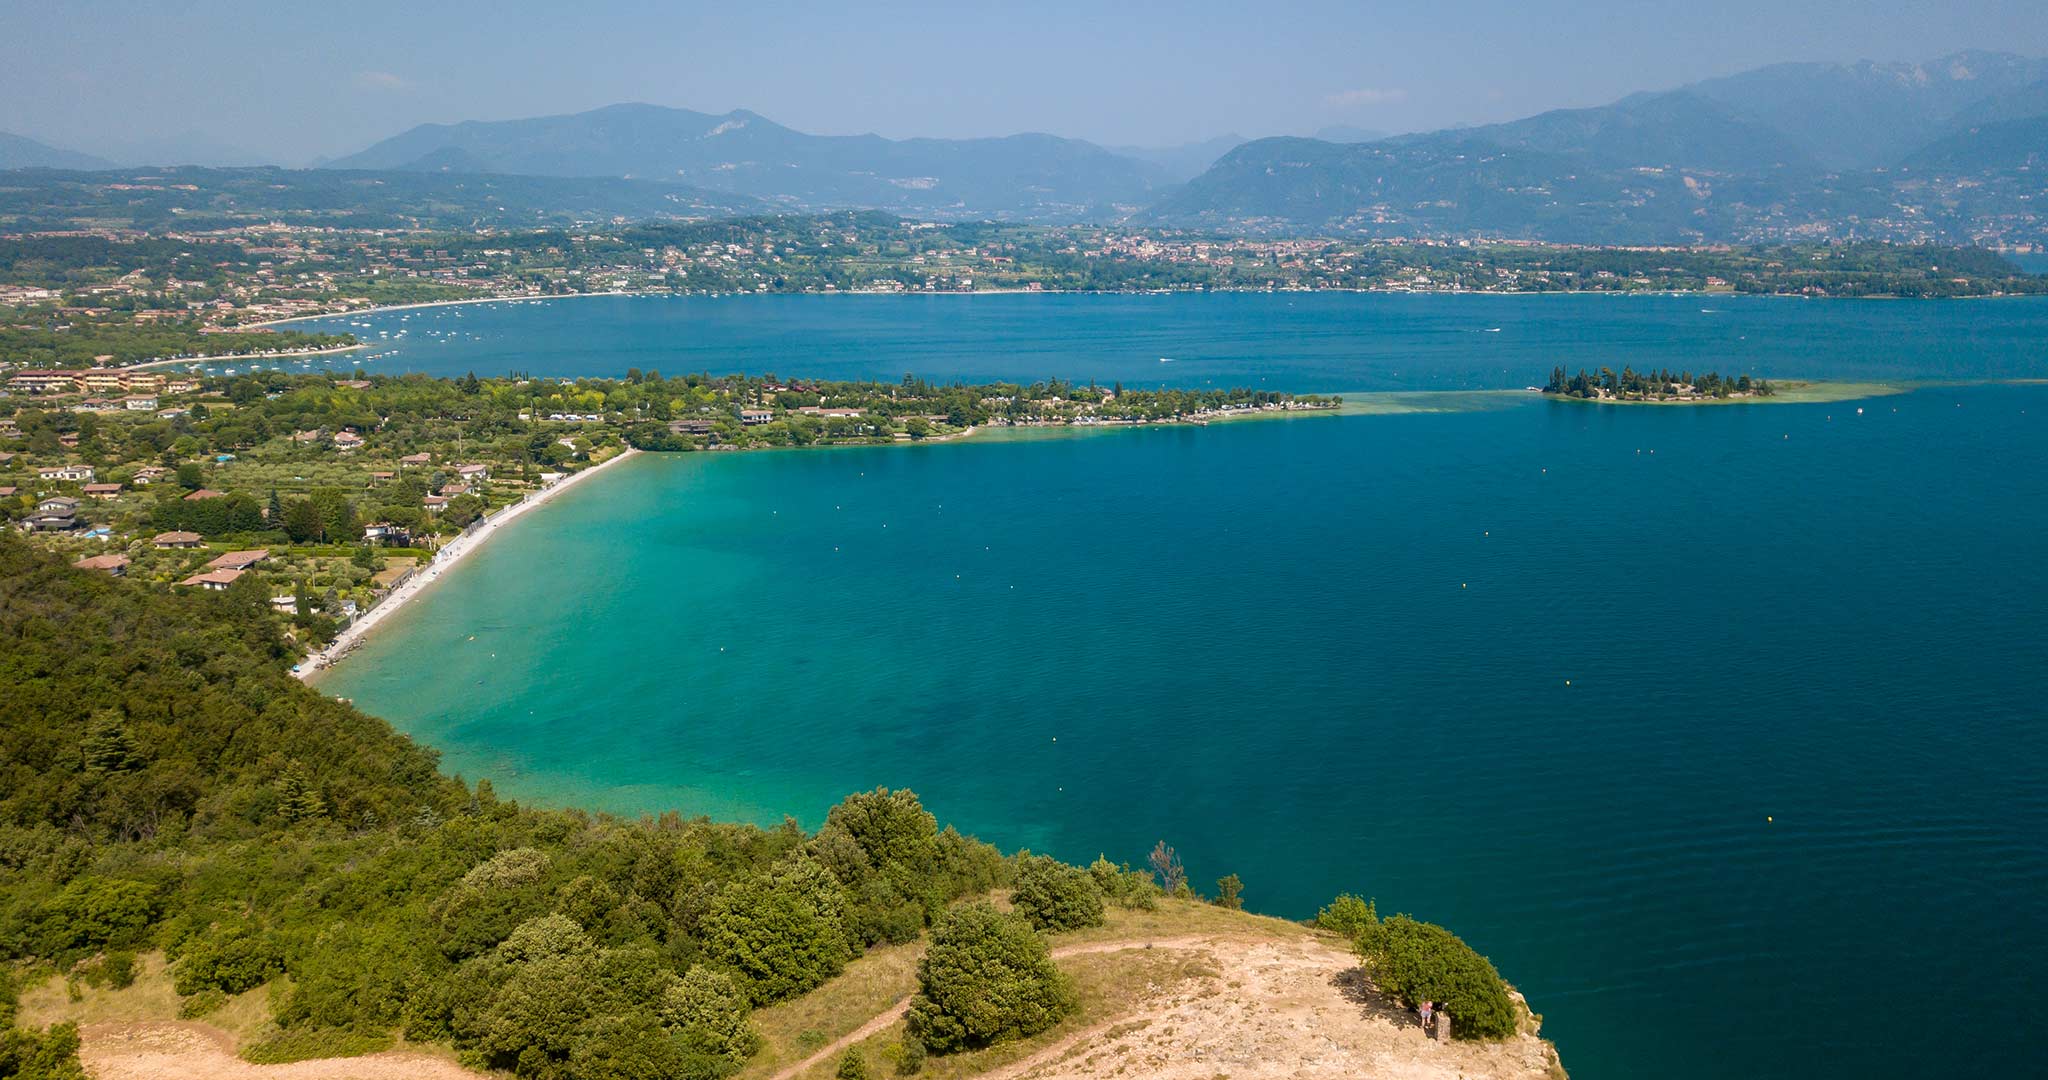 Lake Garda seen from above high up on a hill looking out on a beach and islands